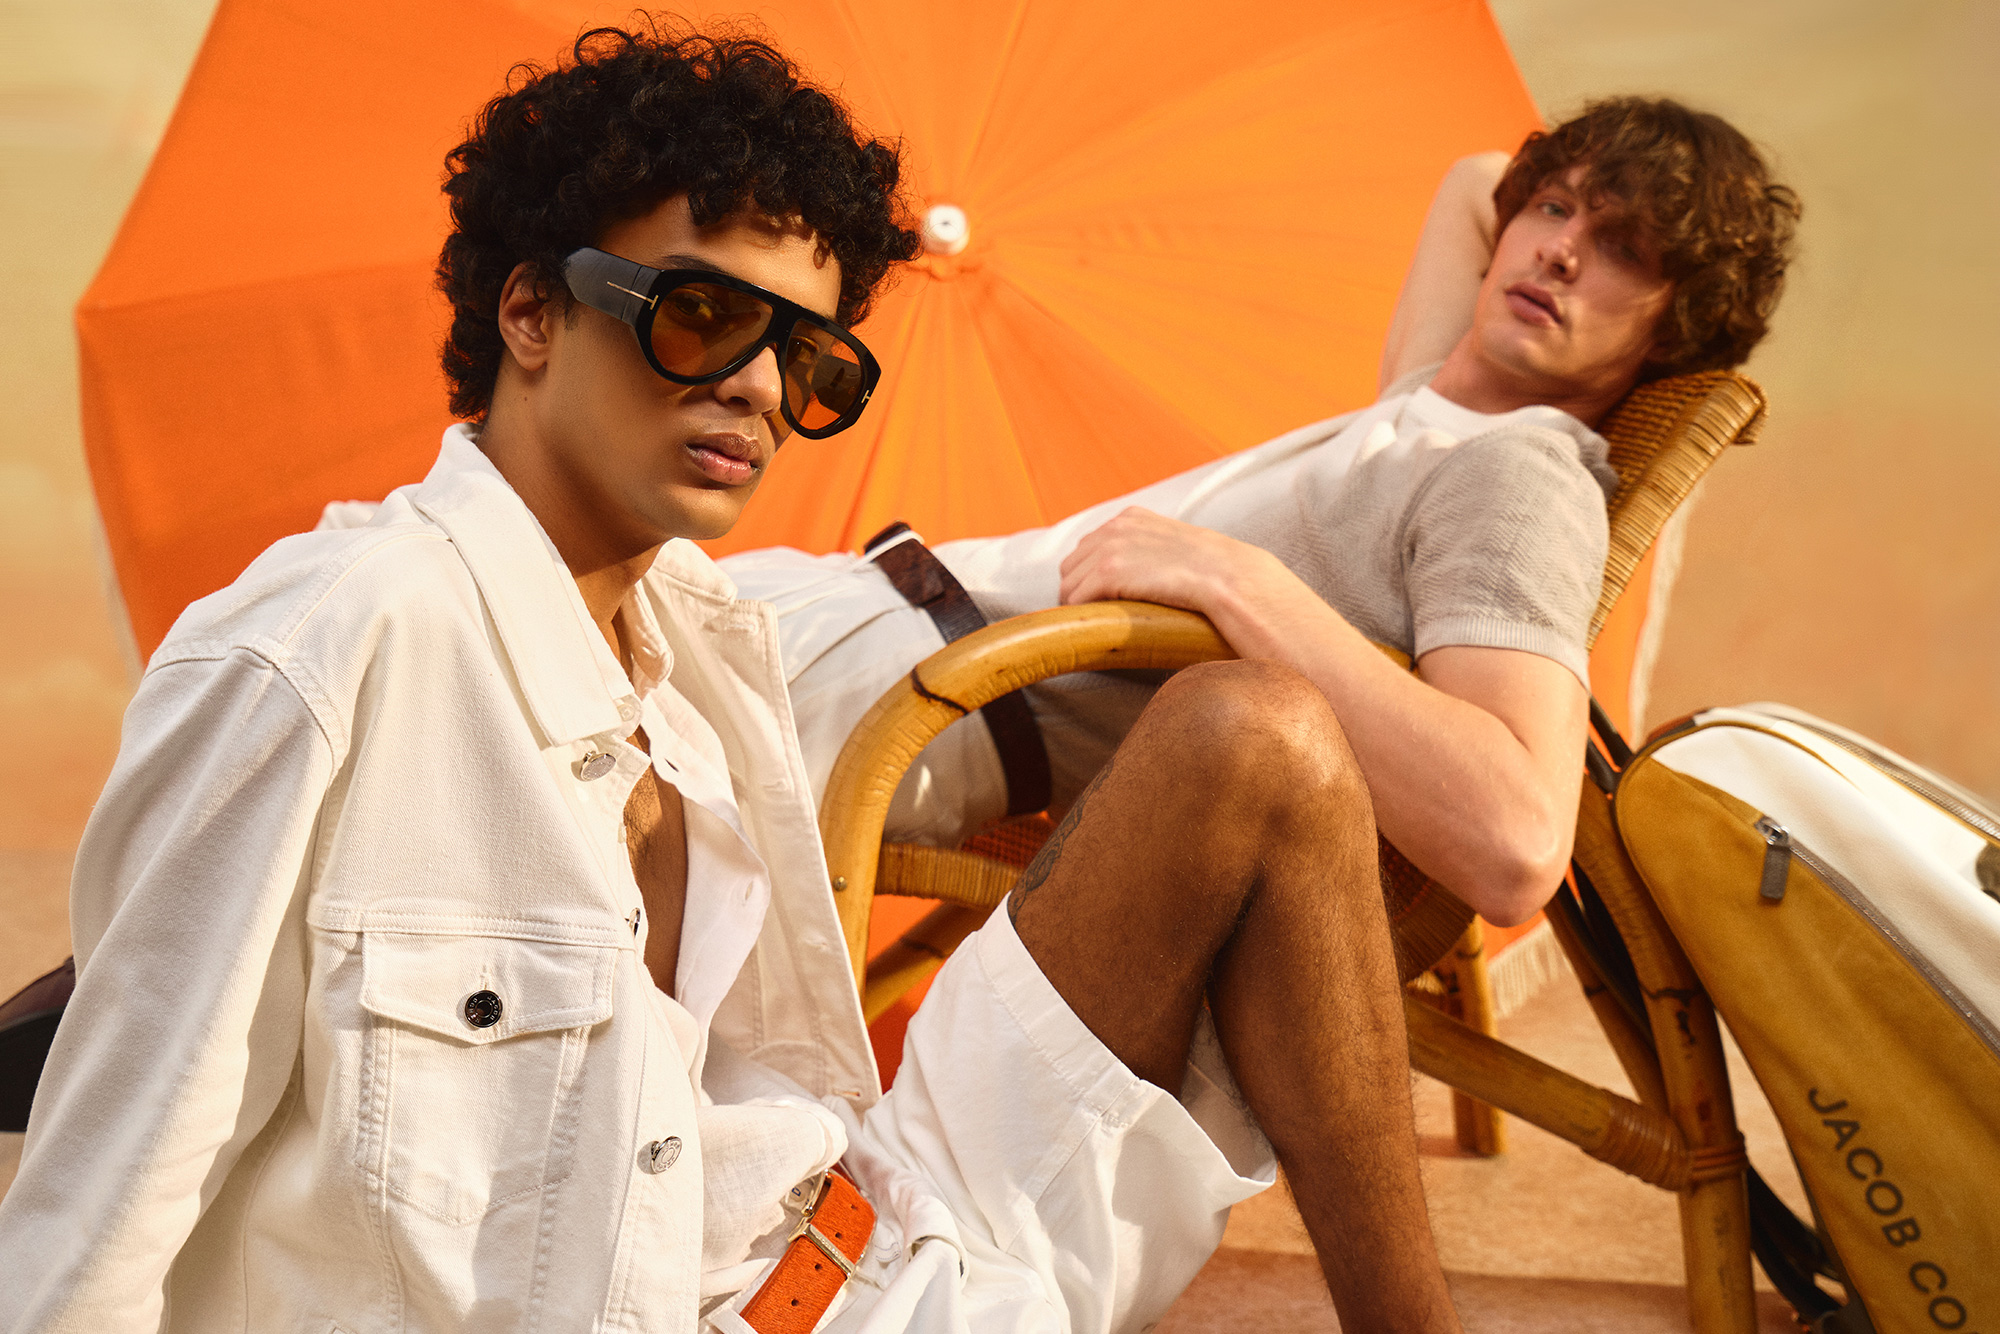 Models recline in summery looks against an orange background